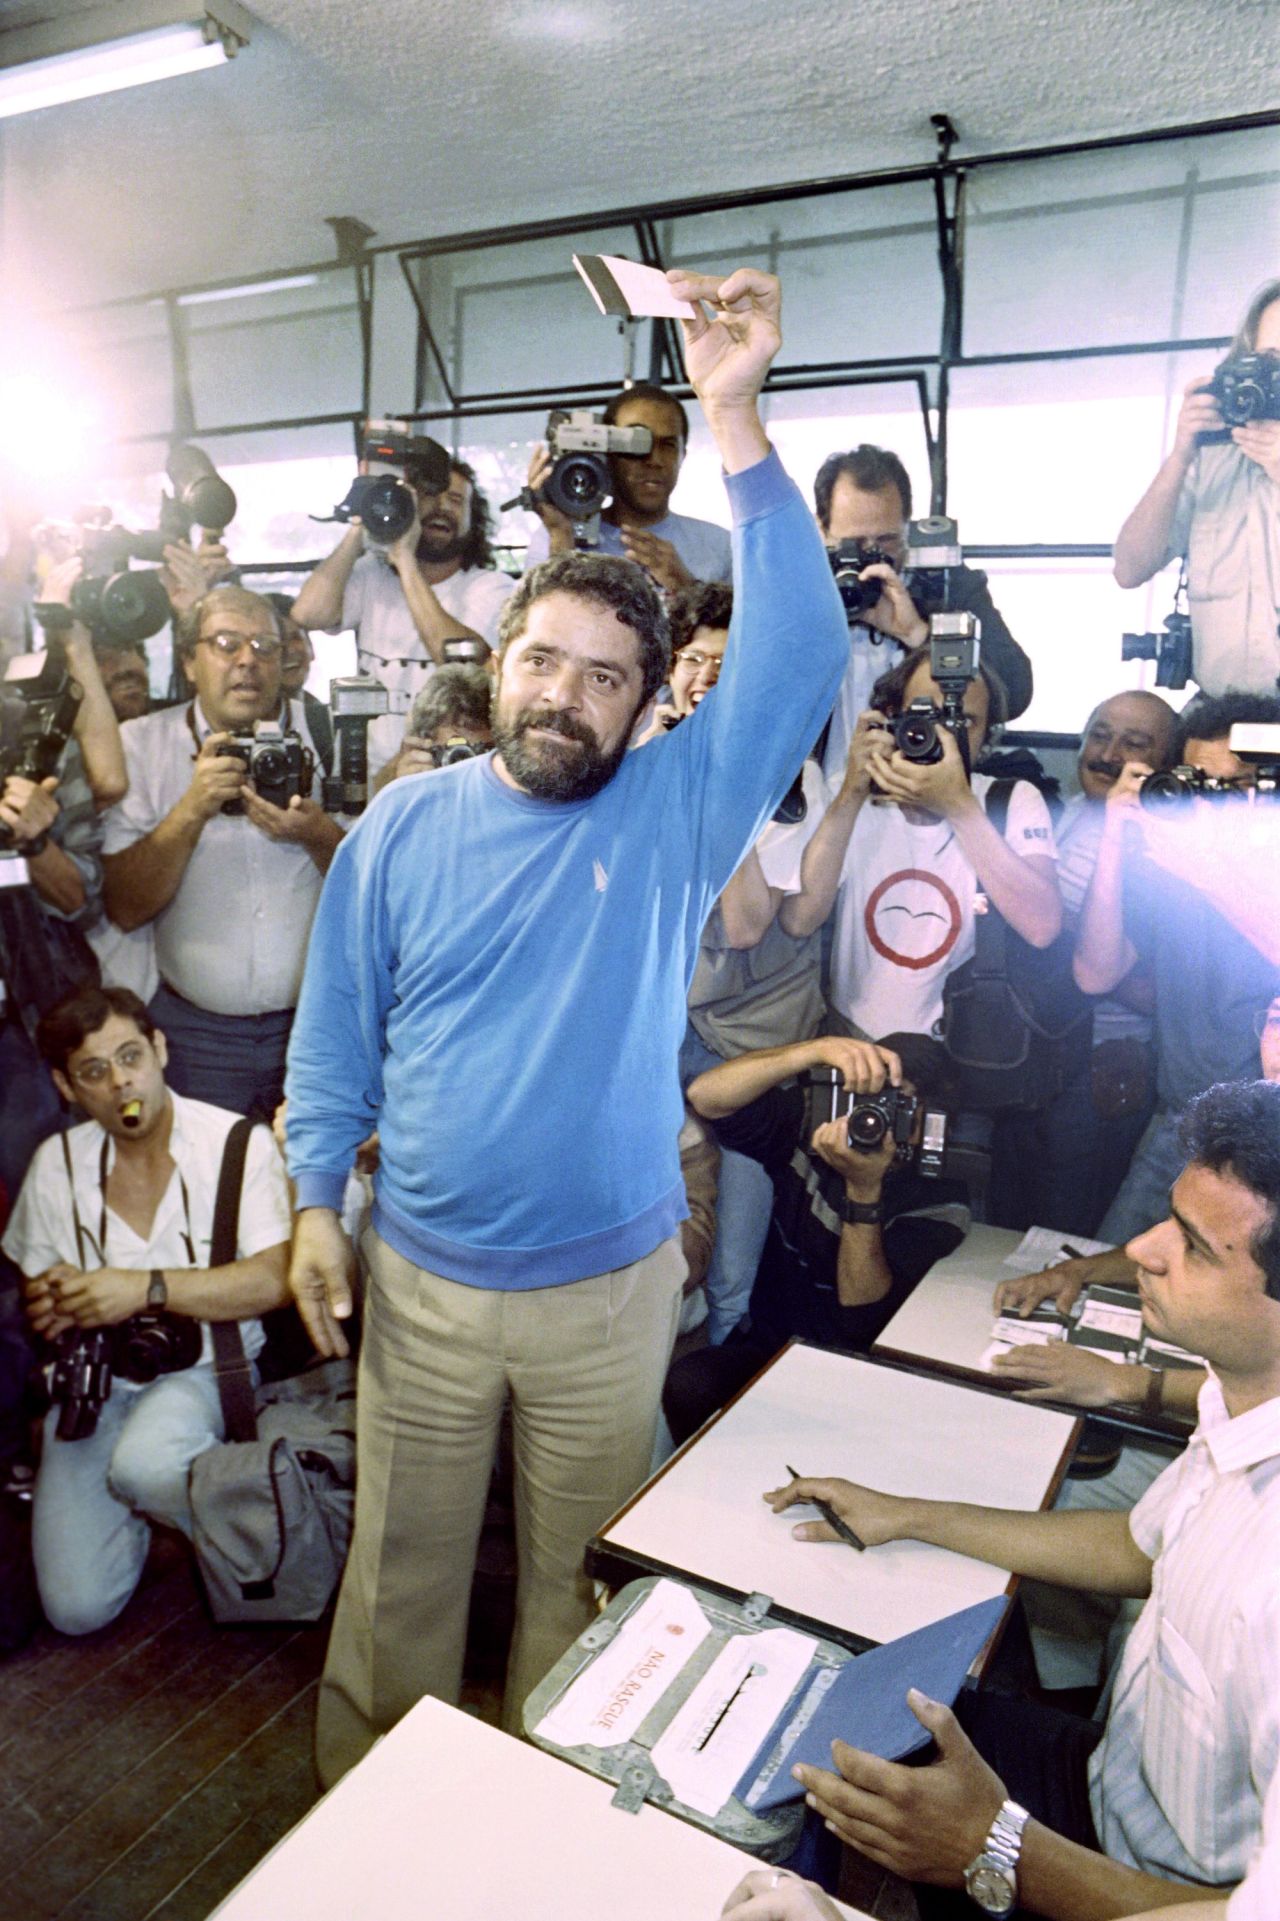 As a first-time presidential candidate, Lula displays his vote before placing it in a ballot box in Rio de Janeiro in 1989. Lula ran in Brazil's first democratic elections since 1960.